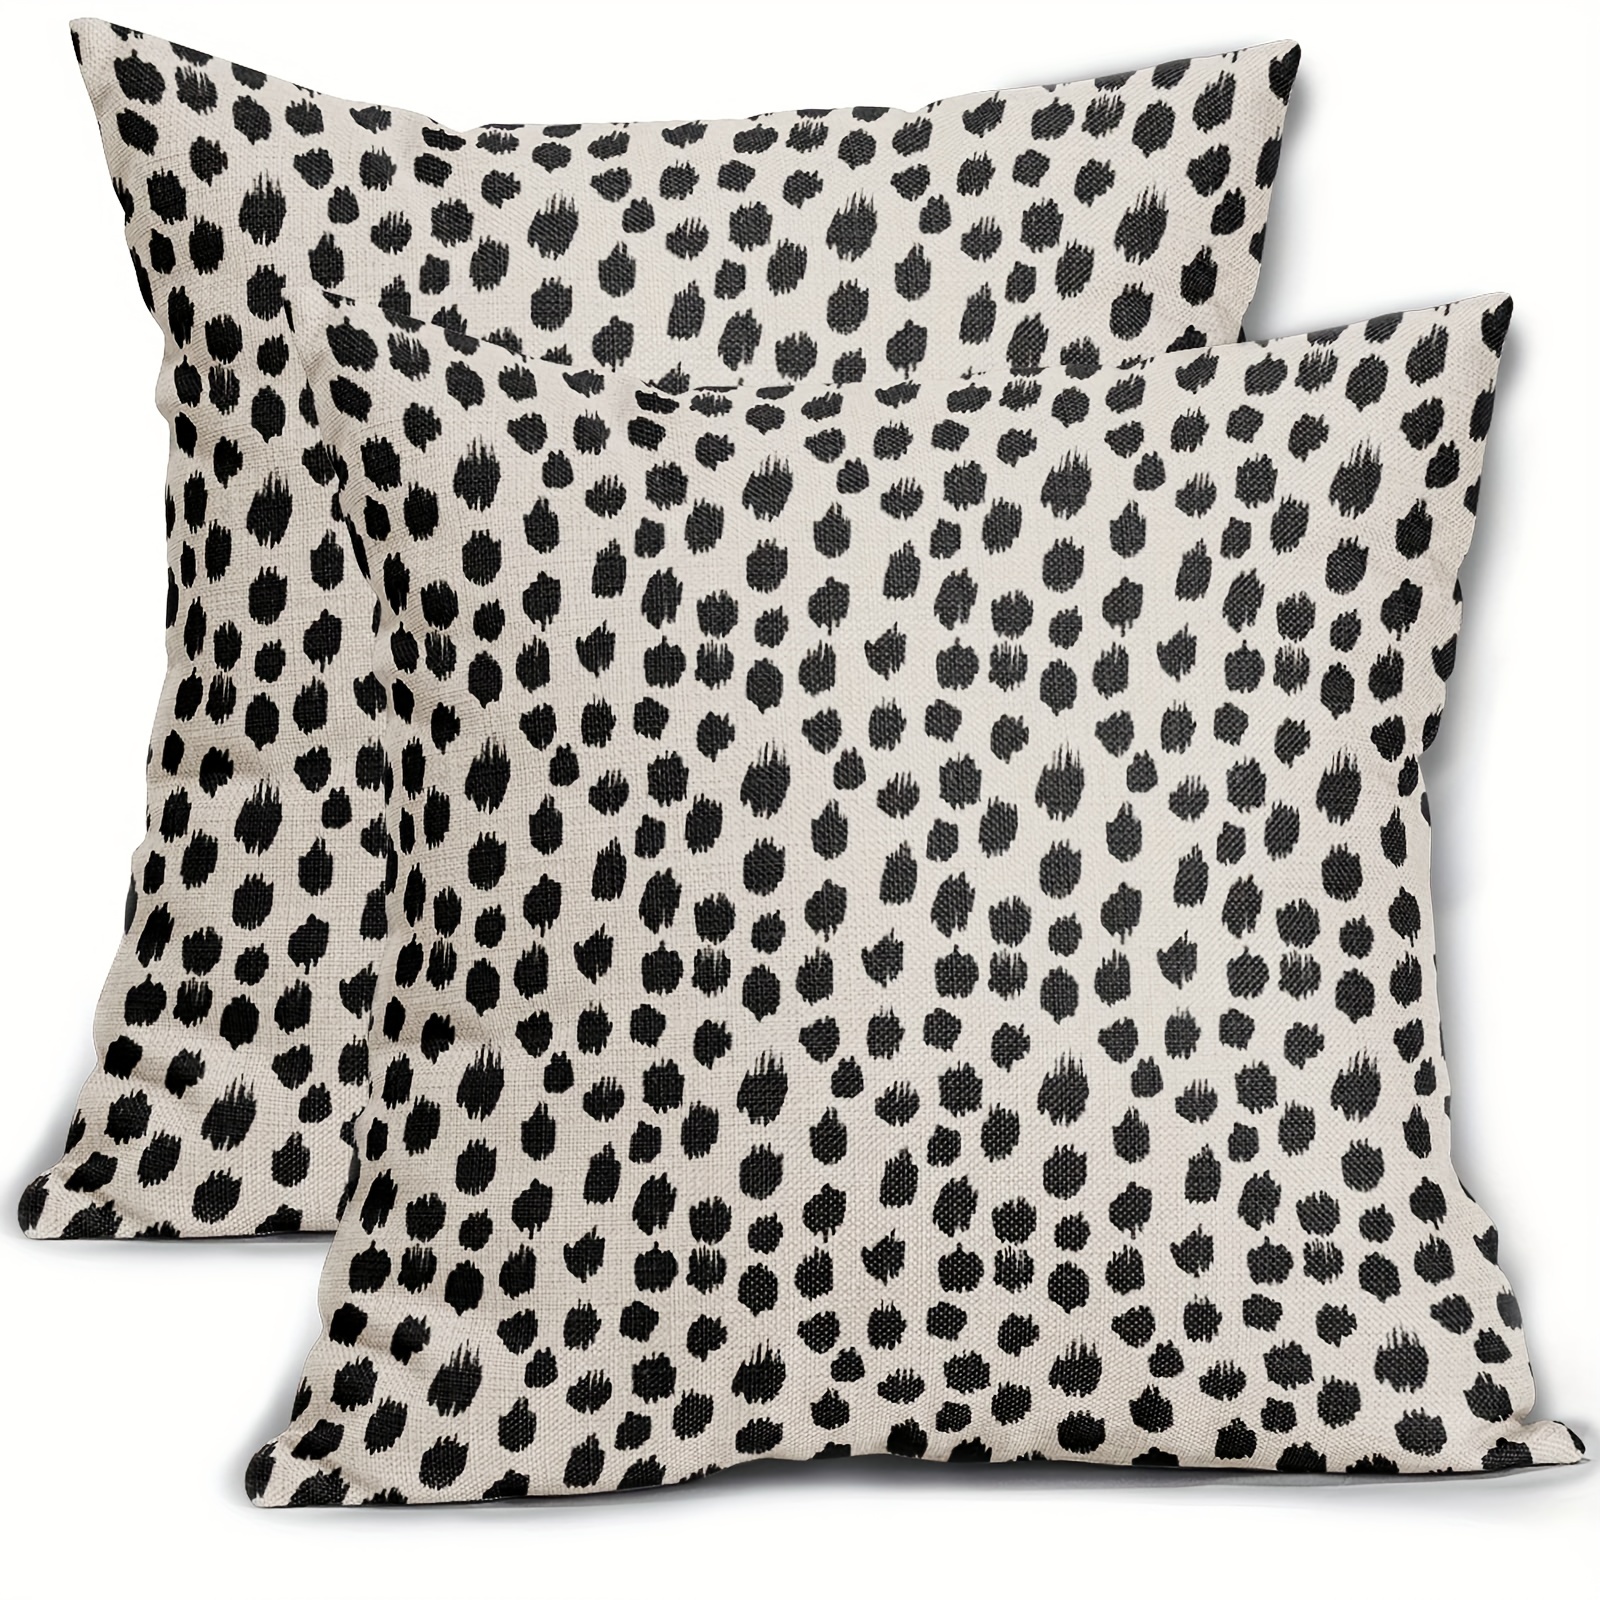 

2pcs Polka Dot Pillow Covers Boho Design Decorative Outdoor Square Cushion Cover Pillow Case For Sofa Couch Bed Home Decor, No Pillow Core, 18x18 Inches